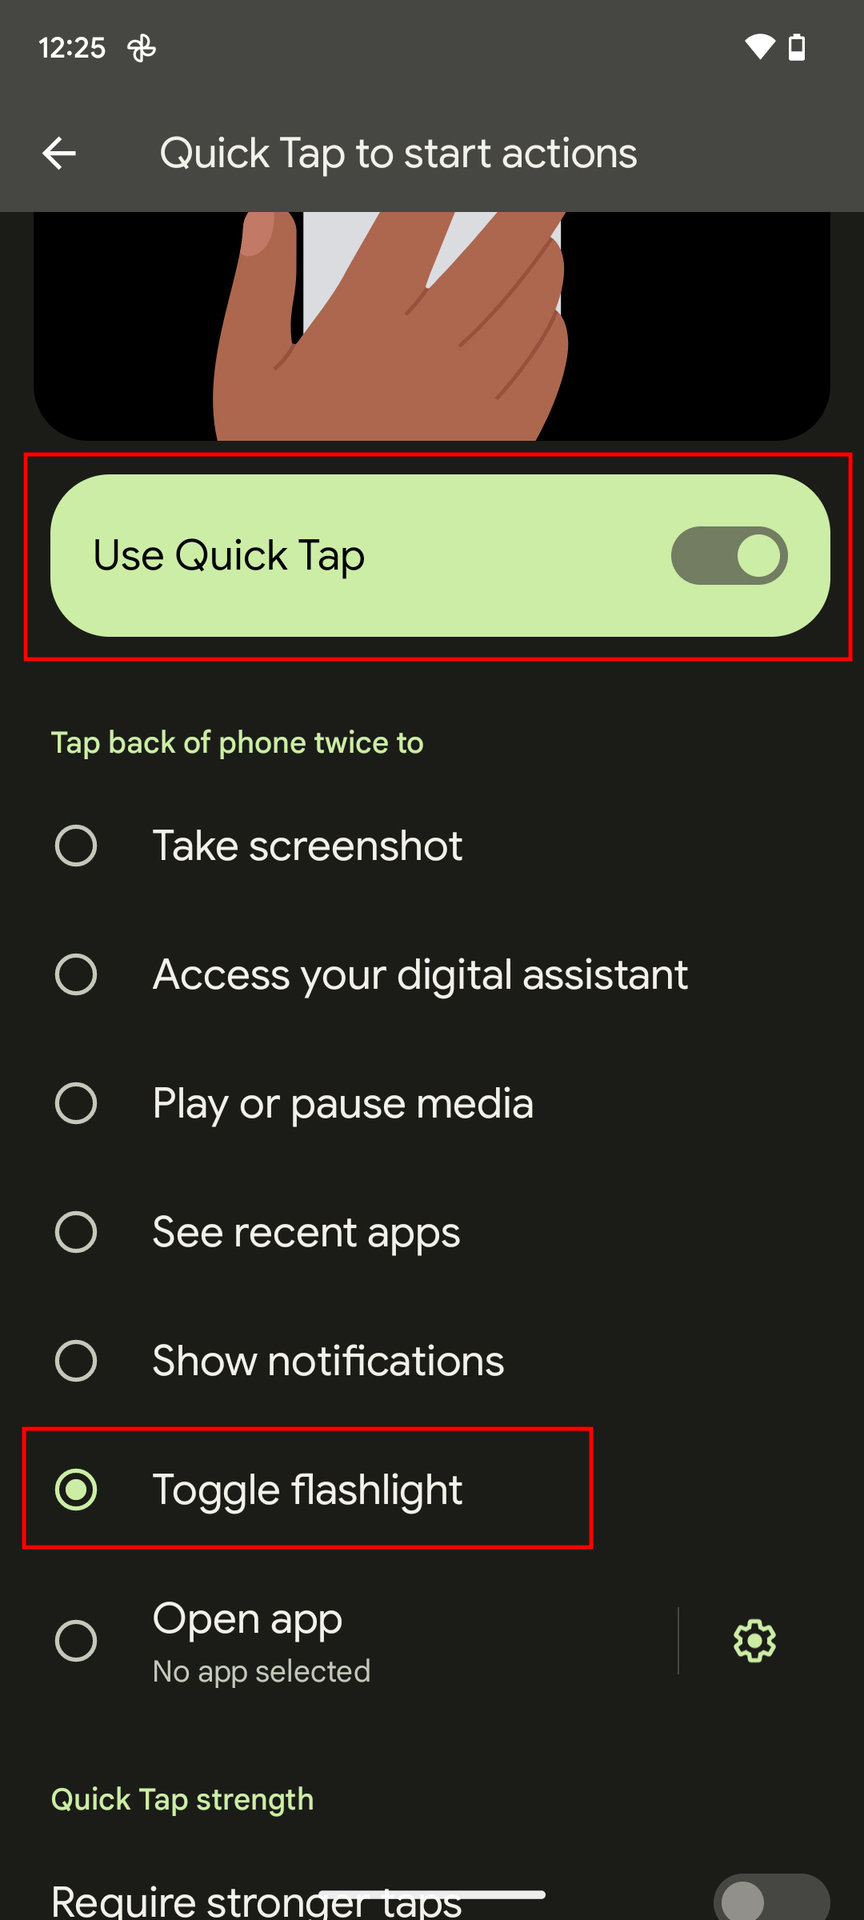 How to use Quick Tap to toggle flashlight on Pixel phones 4